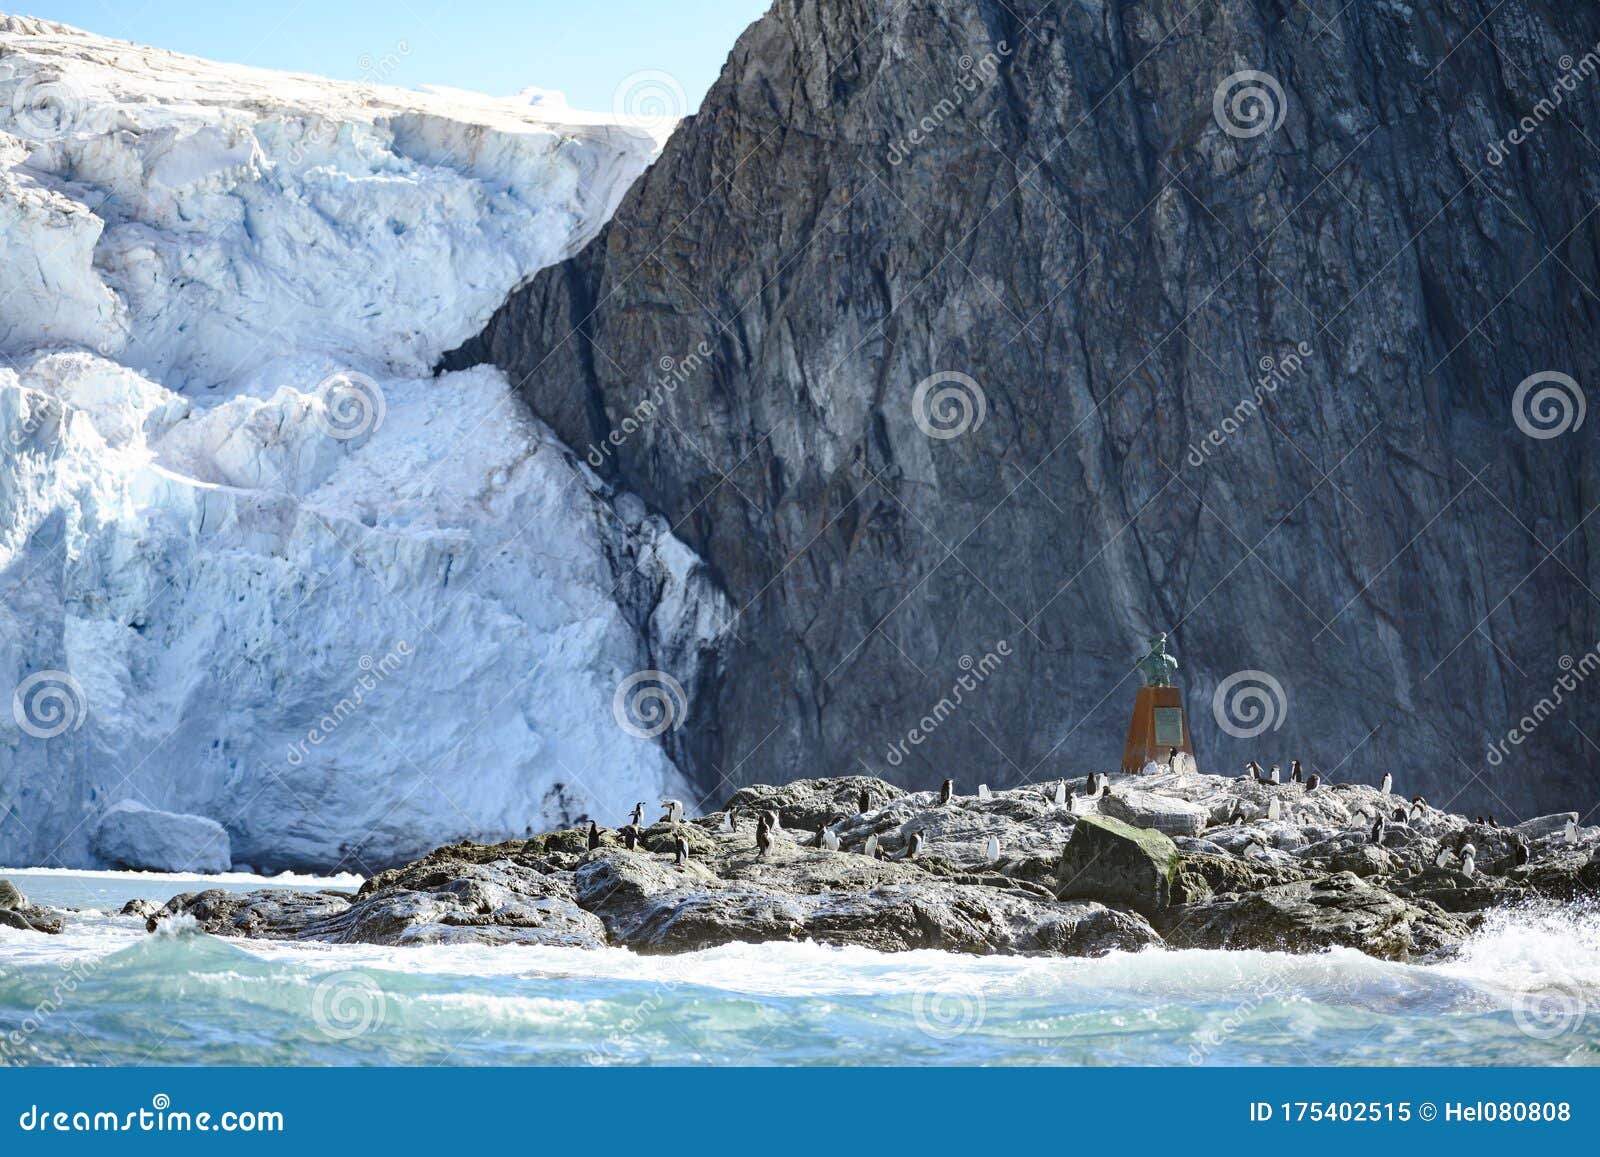 Point Wild at Elephant Island, Where Sir Ernest Shackleton Let His Shipwrecked Men until Captain Came To Rescue Them. Stock Image - Image of shipwrecked, statue: 175402515